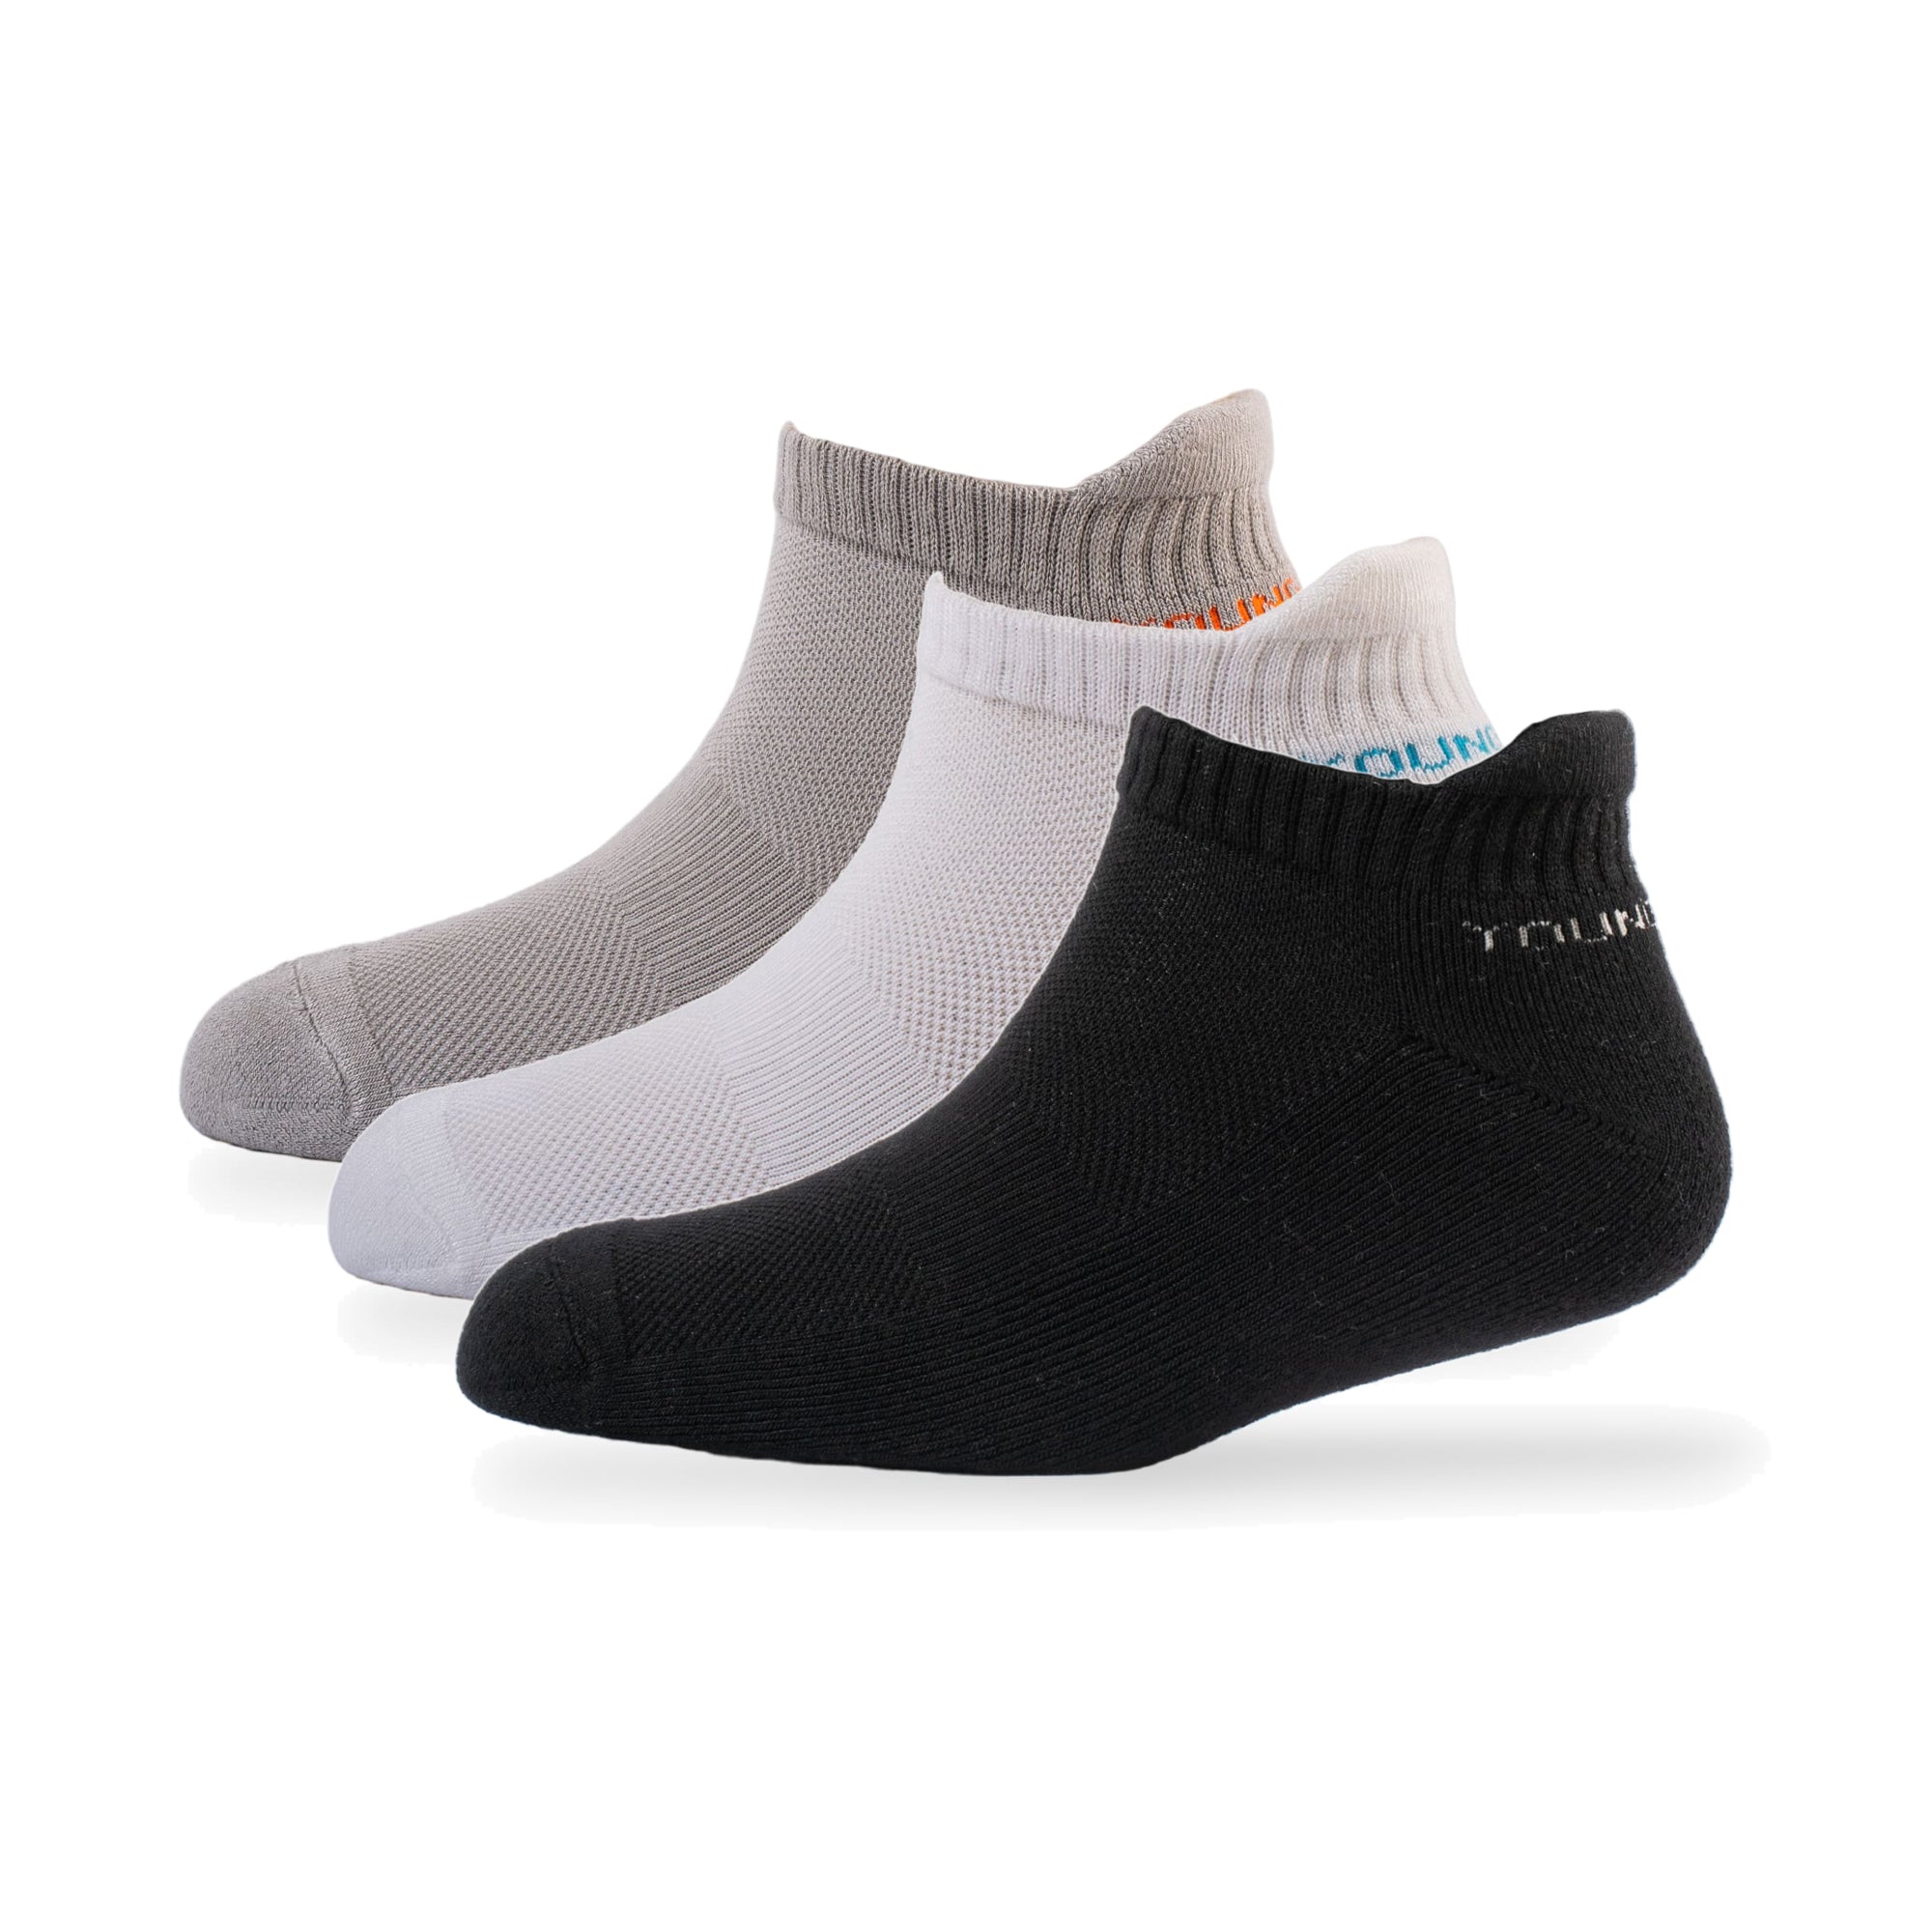 Young Wings Bamboo Fabric Multicolour Solid Design Ankle Length Sports Socks - Pack of 3, Style no.2613-M3